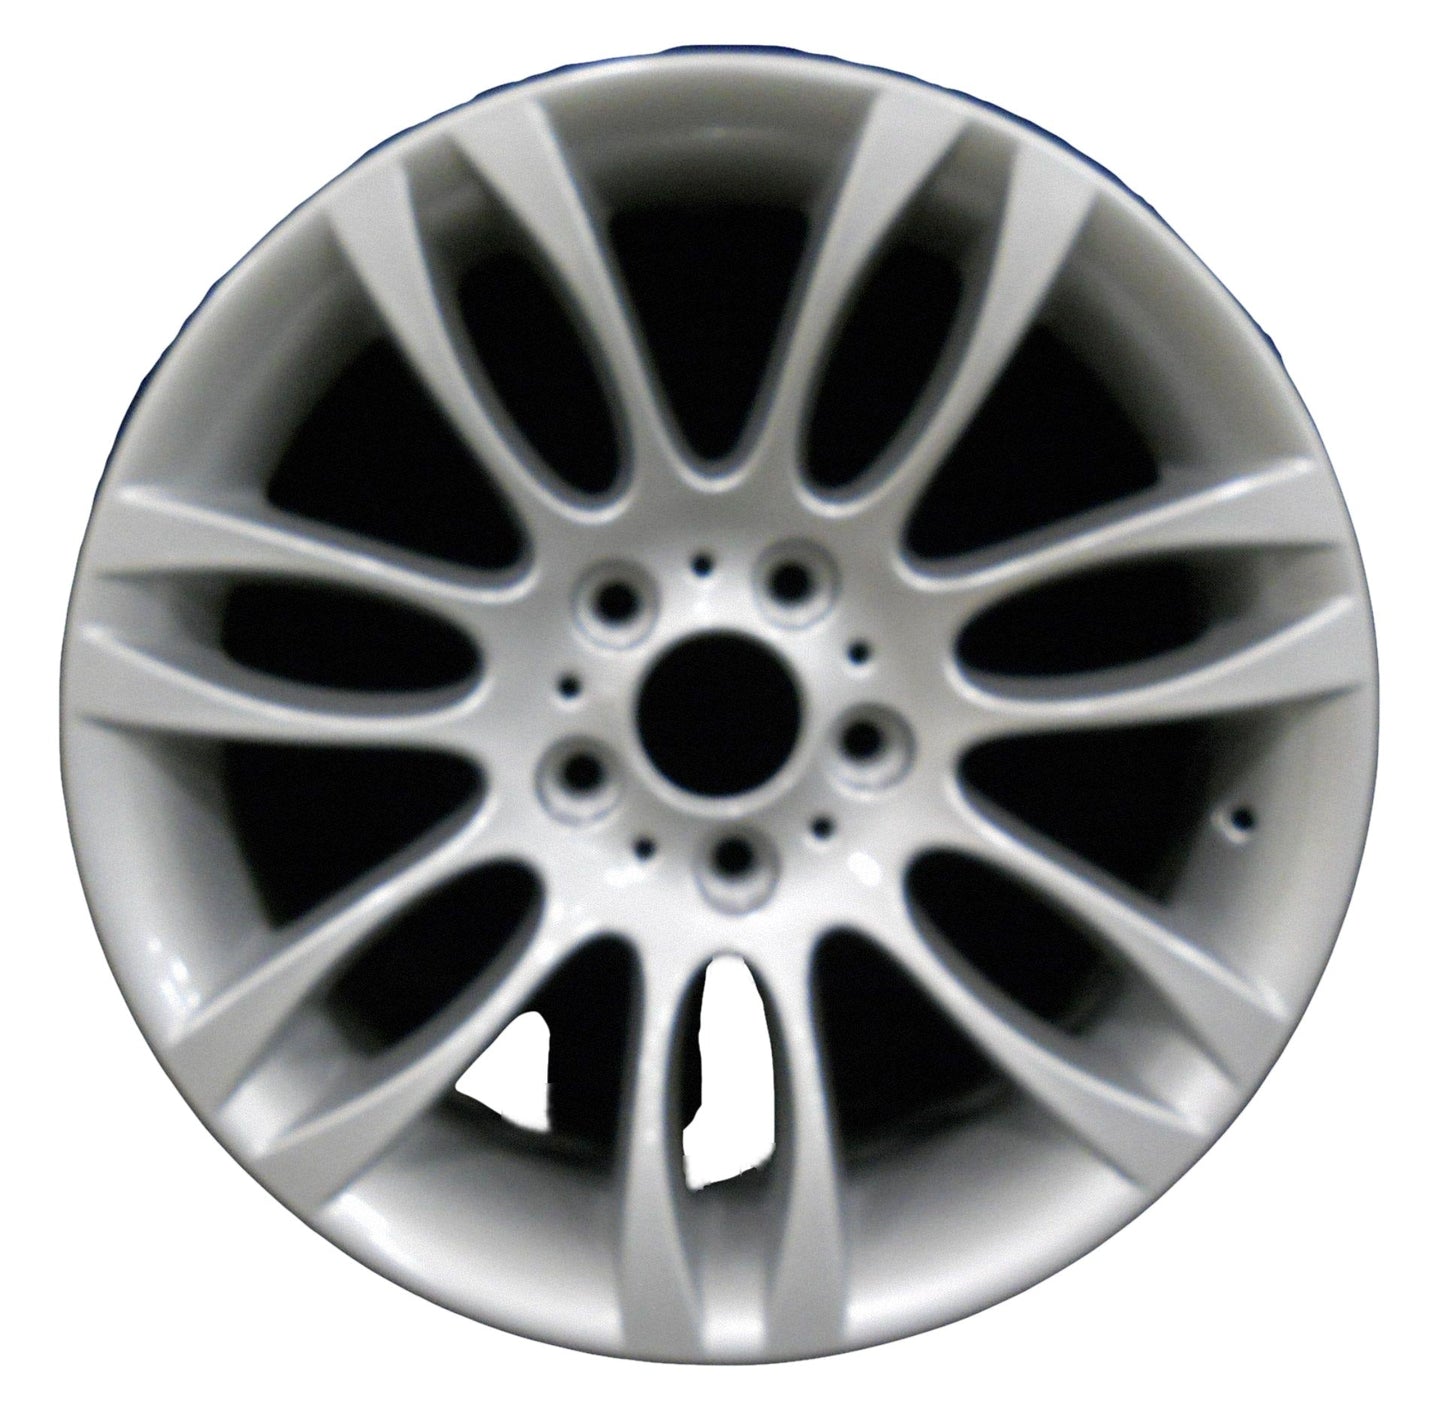 BMW 328i  2007, 2008, 2009, 2010, 2011, 2012, 2013 Factory OEM Car Wheel Size 18x8.5 Alloy WAO.59595RE.PS06.FF